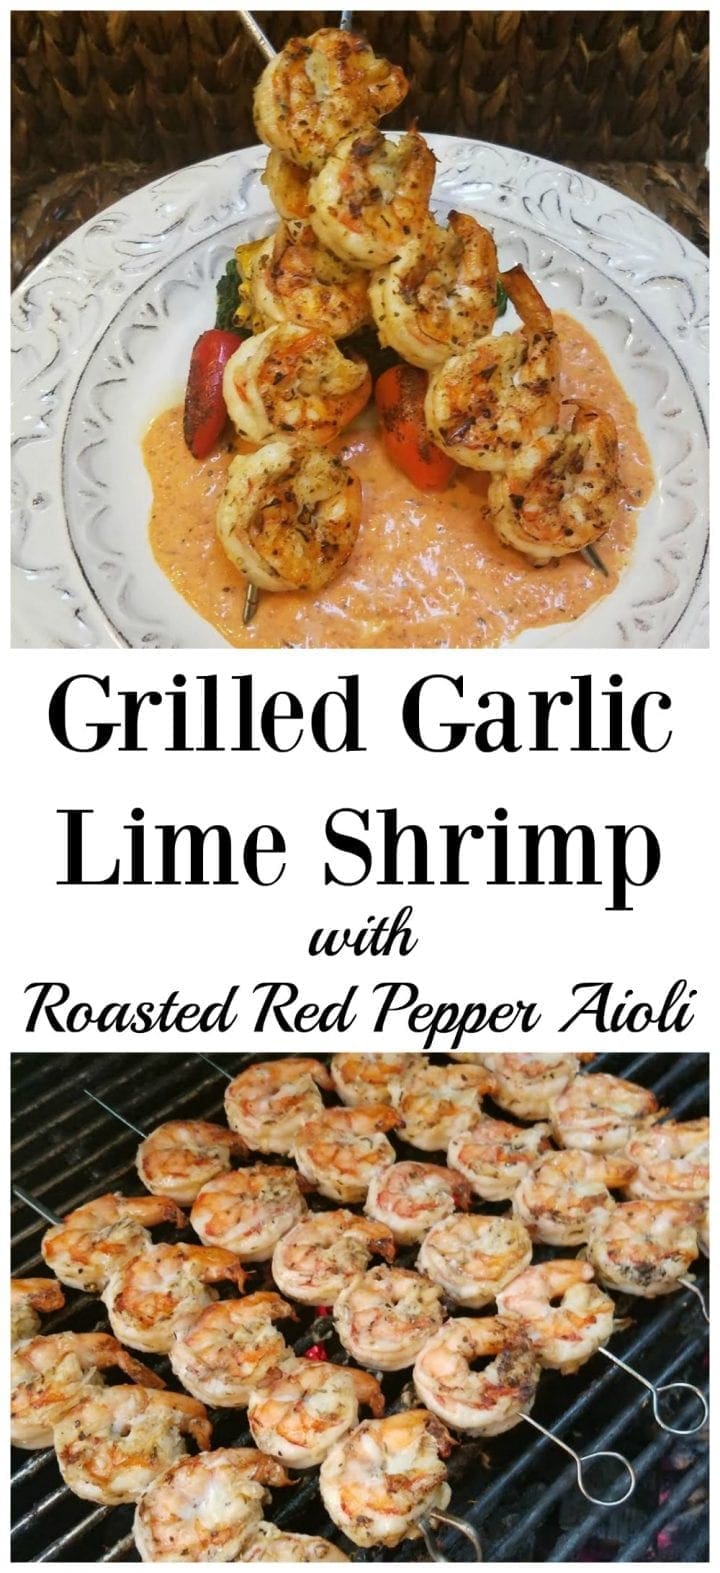 Grilled Garlic Shrimp Recipe with Roasted Red Pepper Aioli